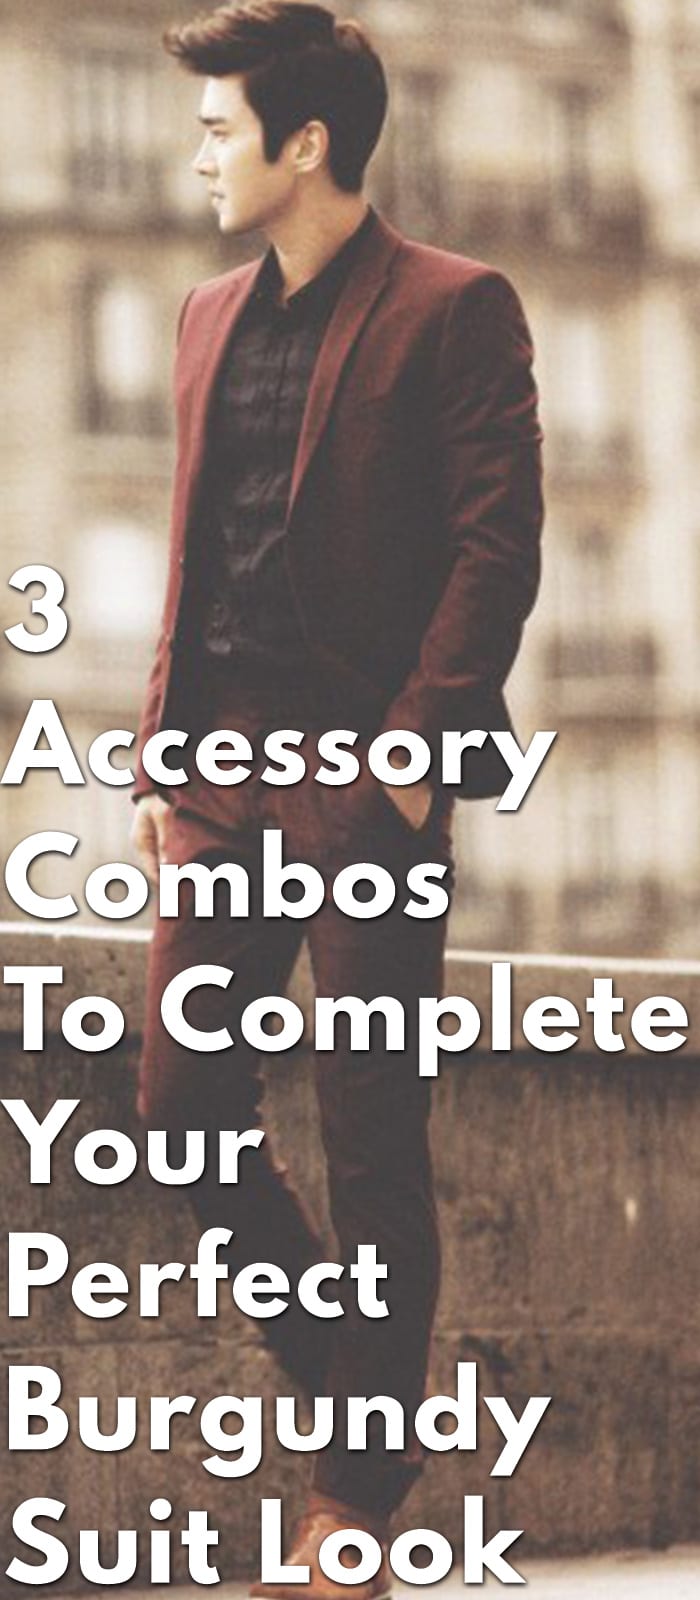 3-Accessory-Combos-To-Complete-Your-Perfect-Burgundy-Suit-Look